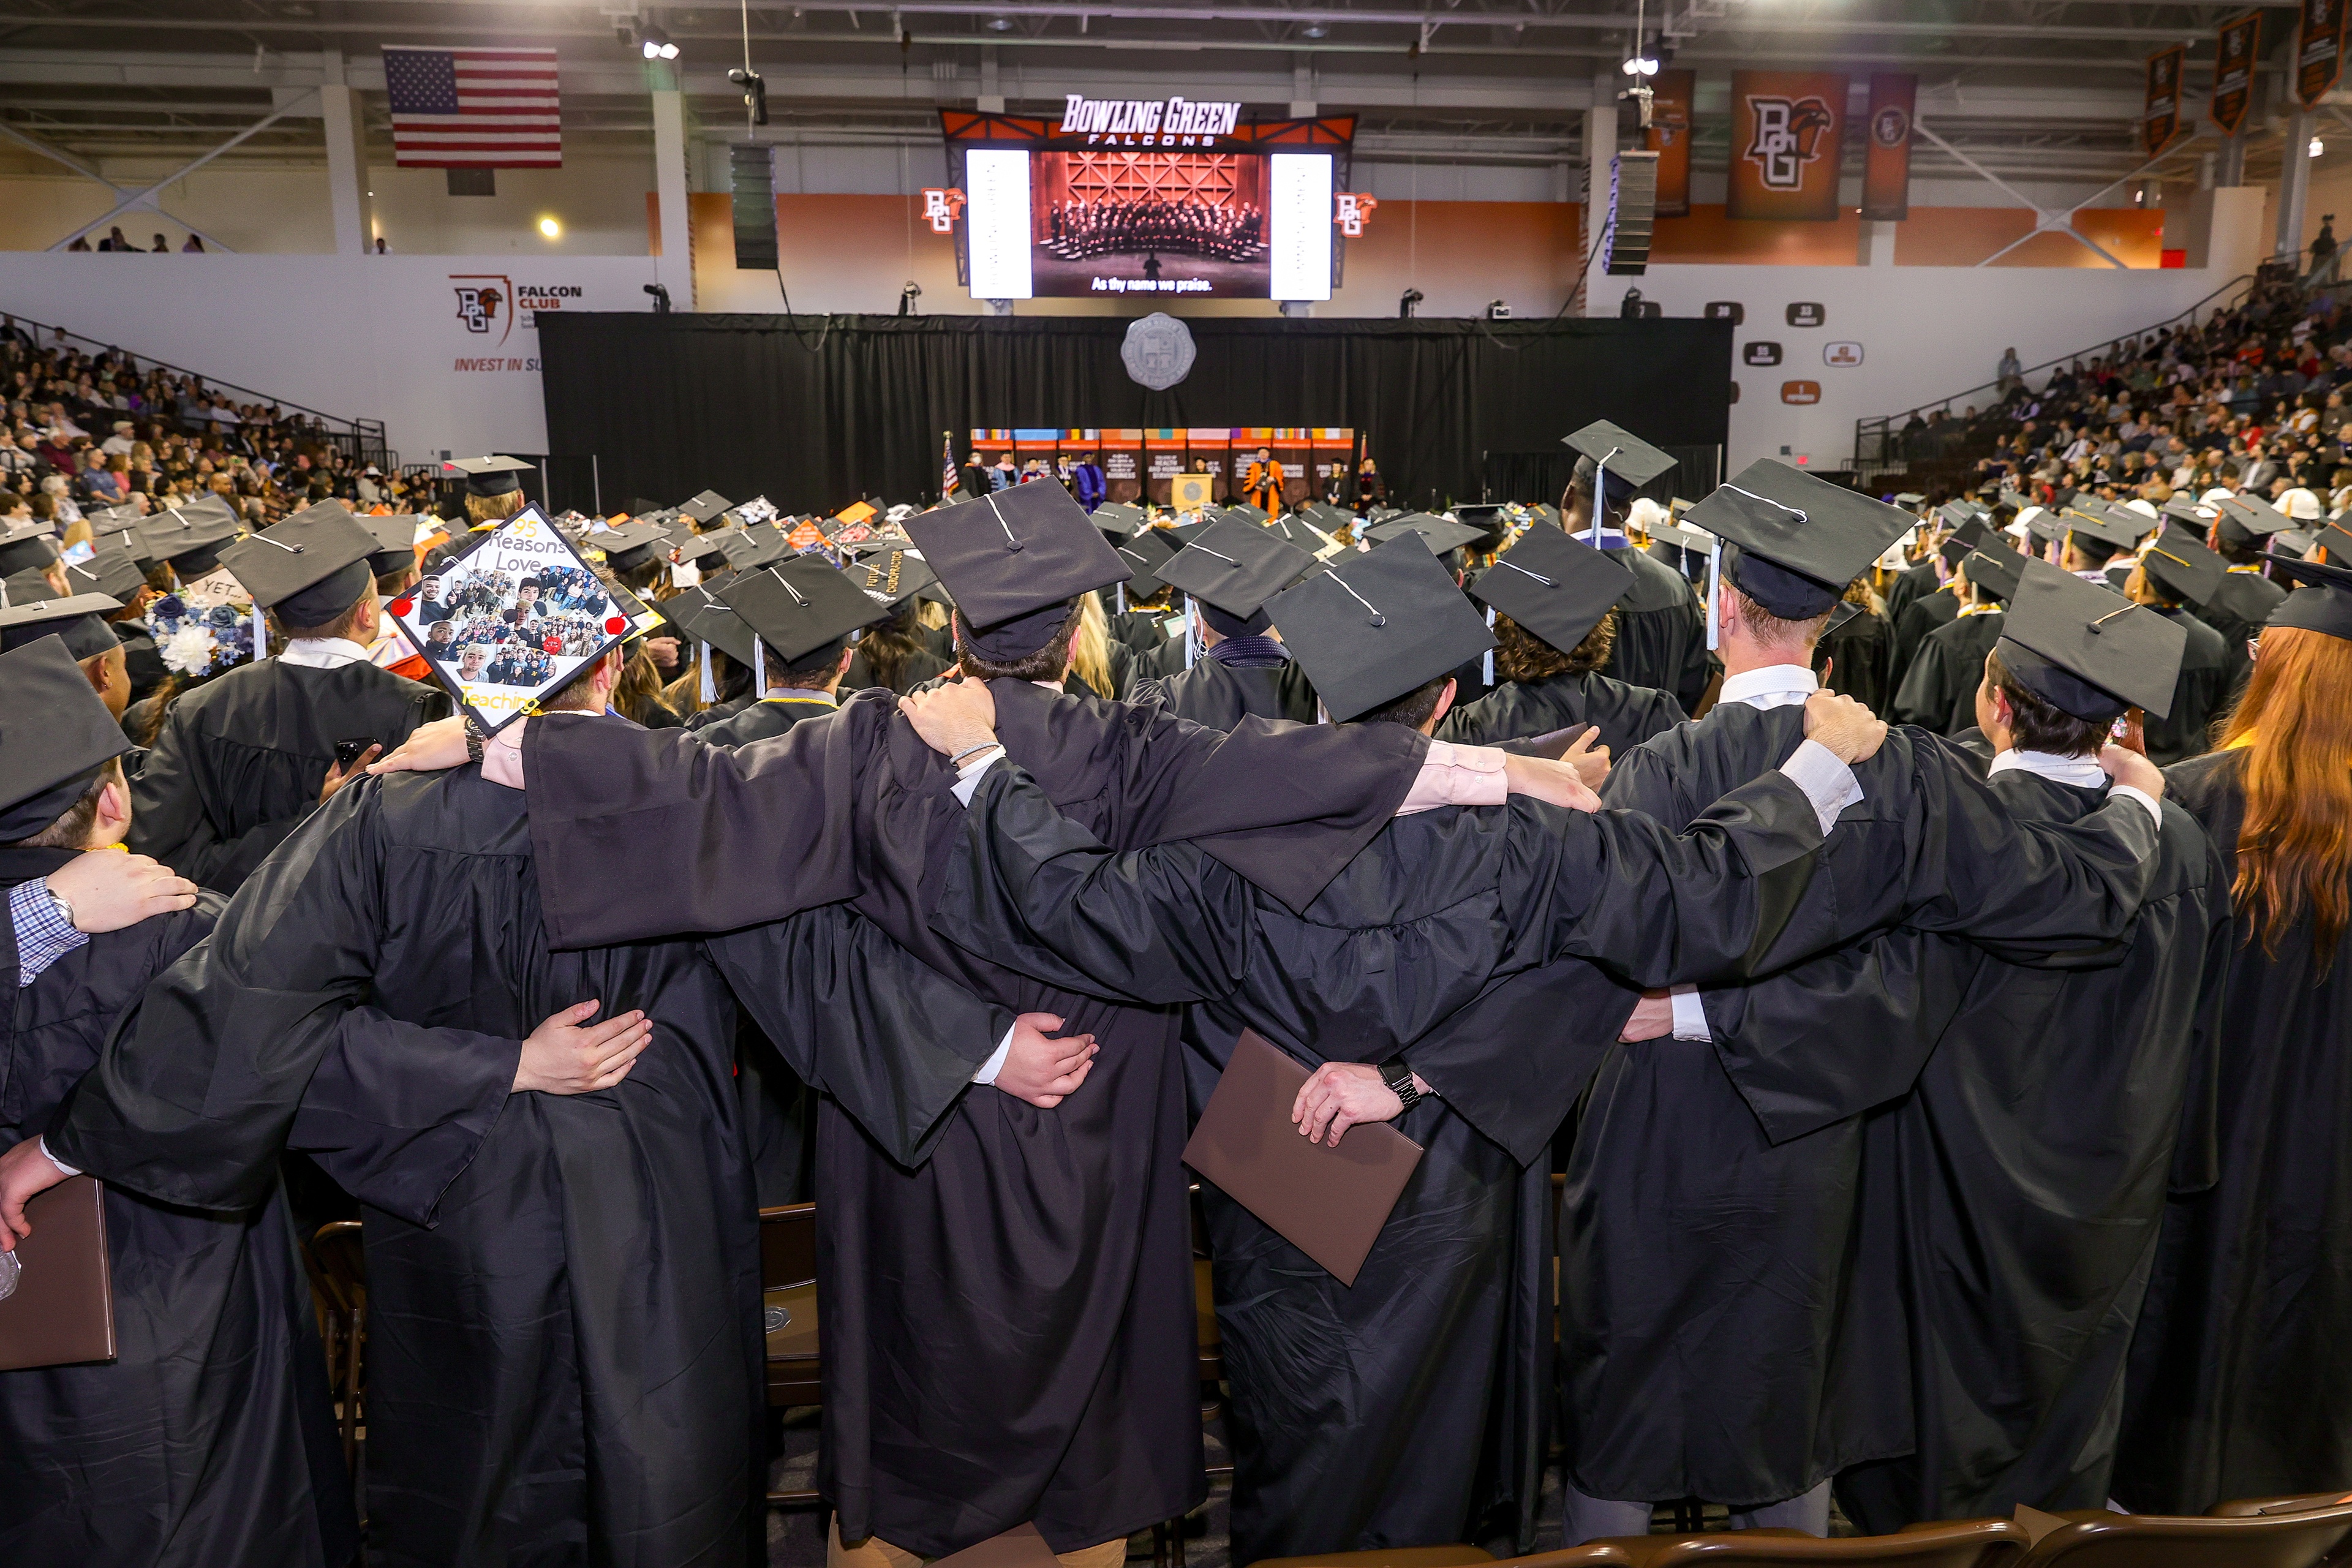 BGSU graduates stand arm in arm to sing alma mater 